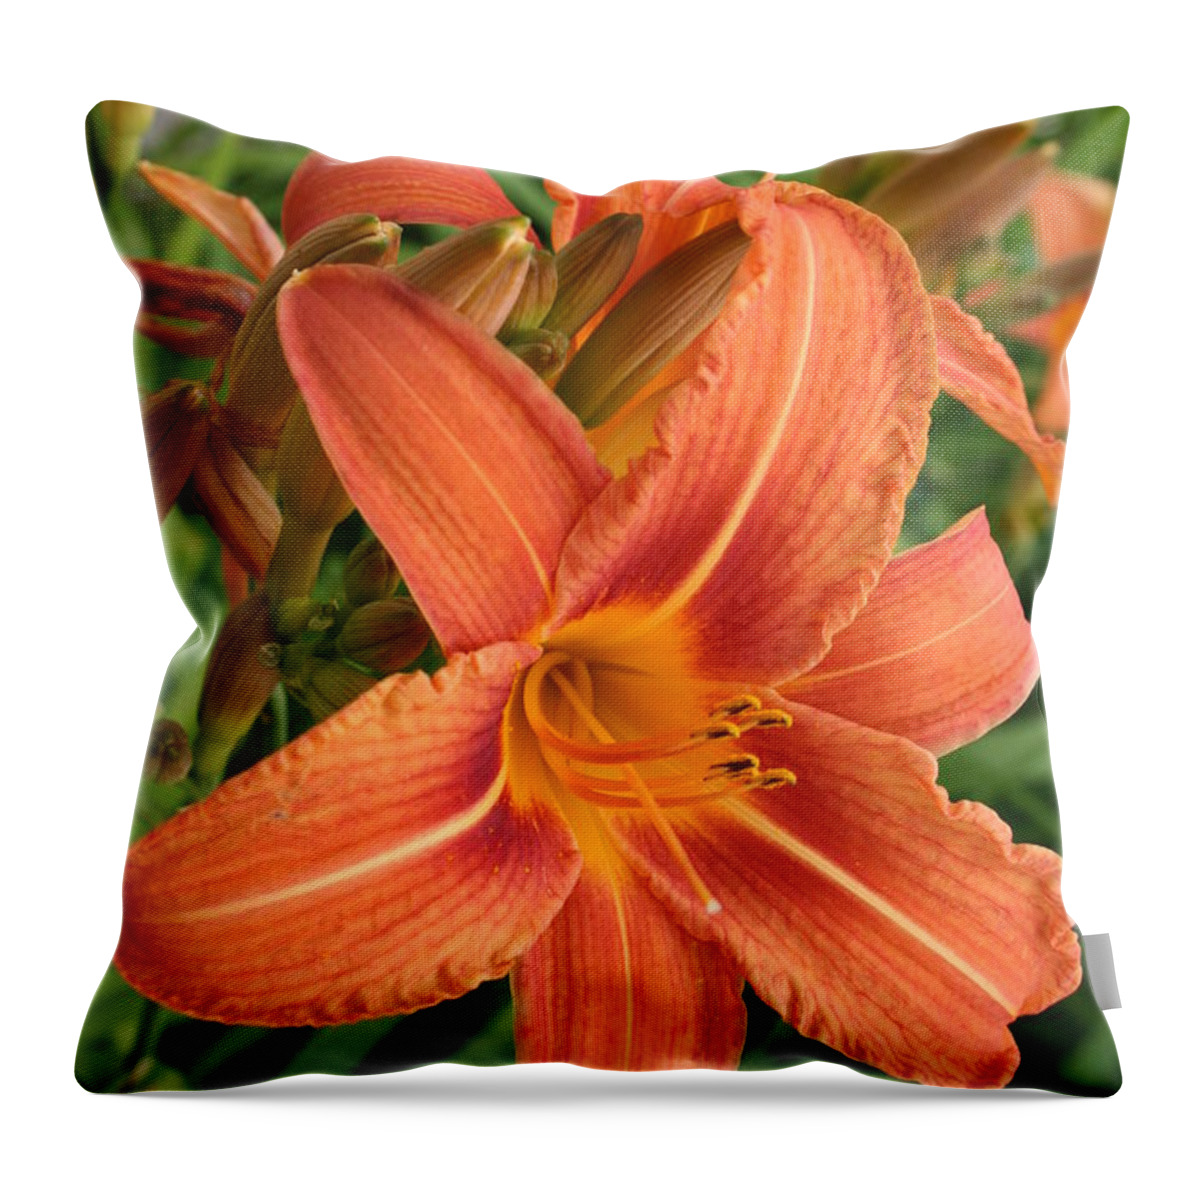 Lilies Throw Pillow featuring the photograph Splendid Day Lily by Christiane Schulze Art And Photography